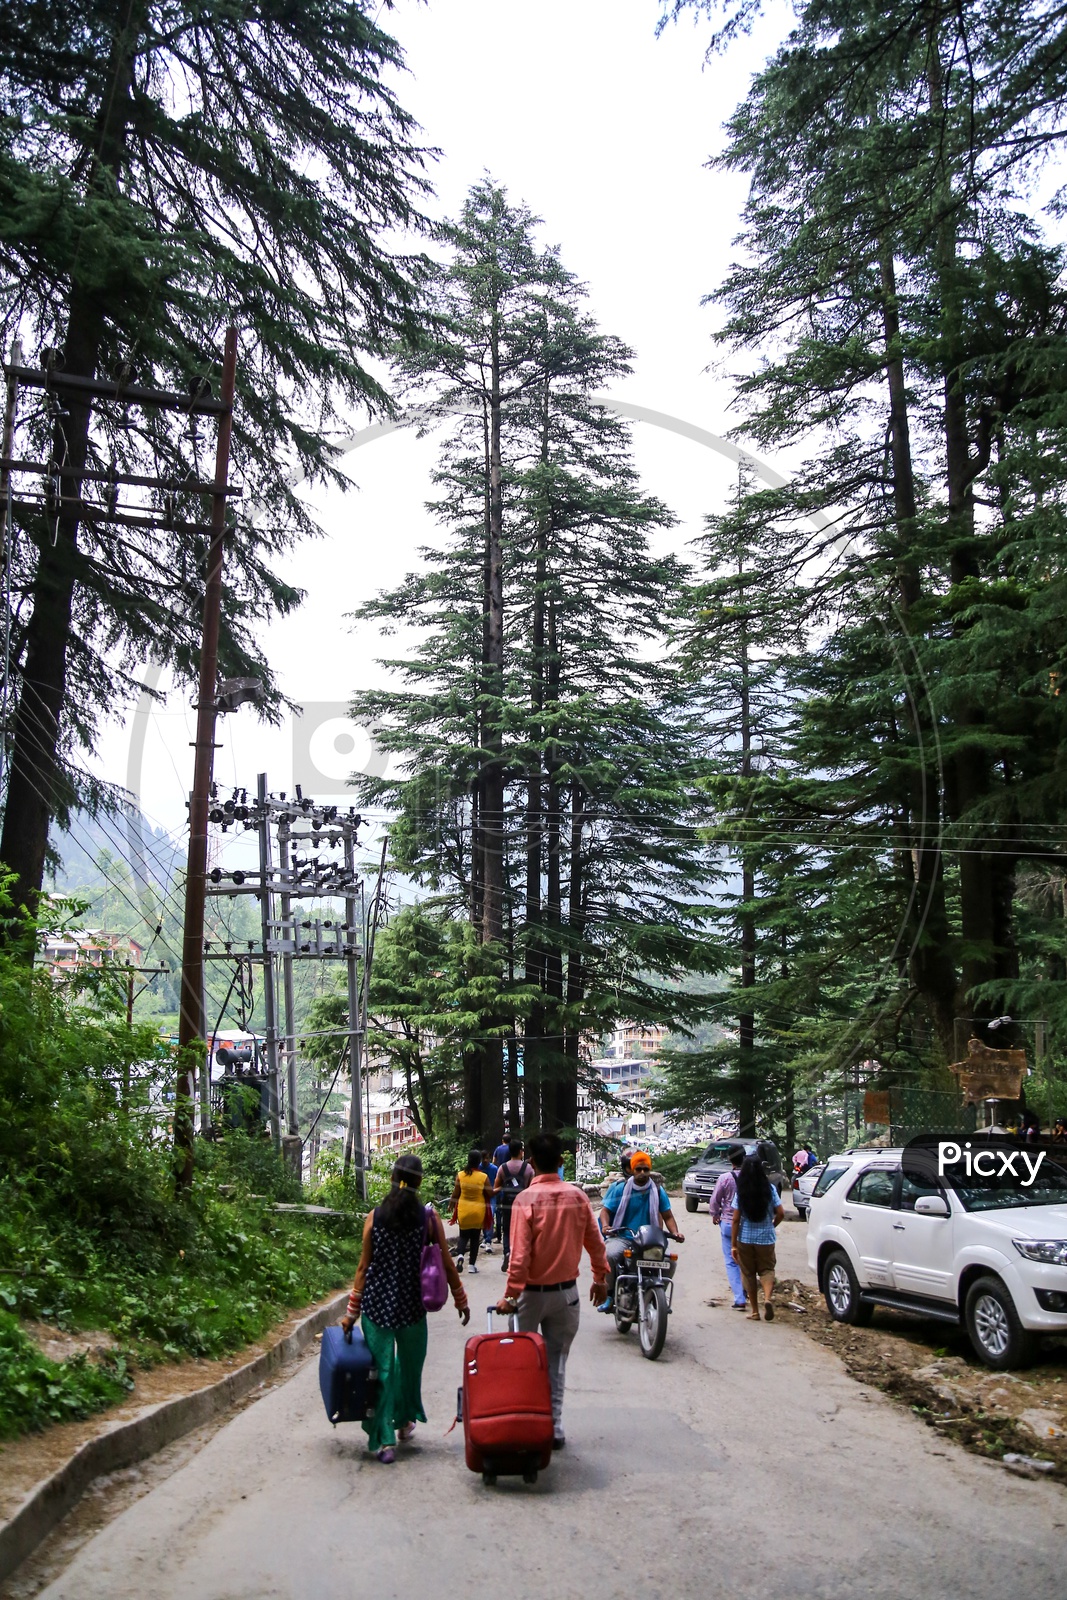 Streets of Manali